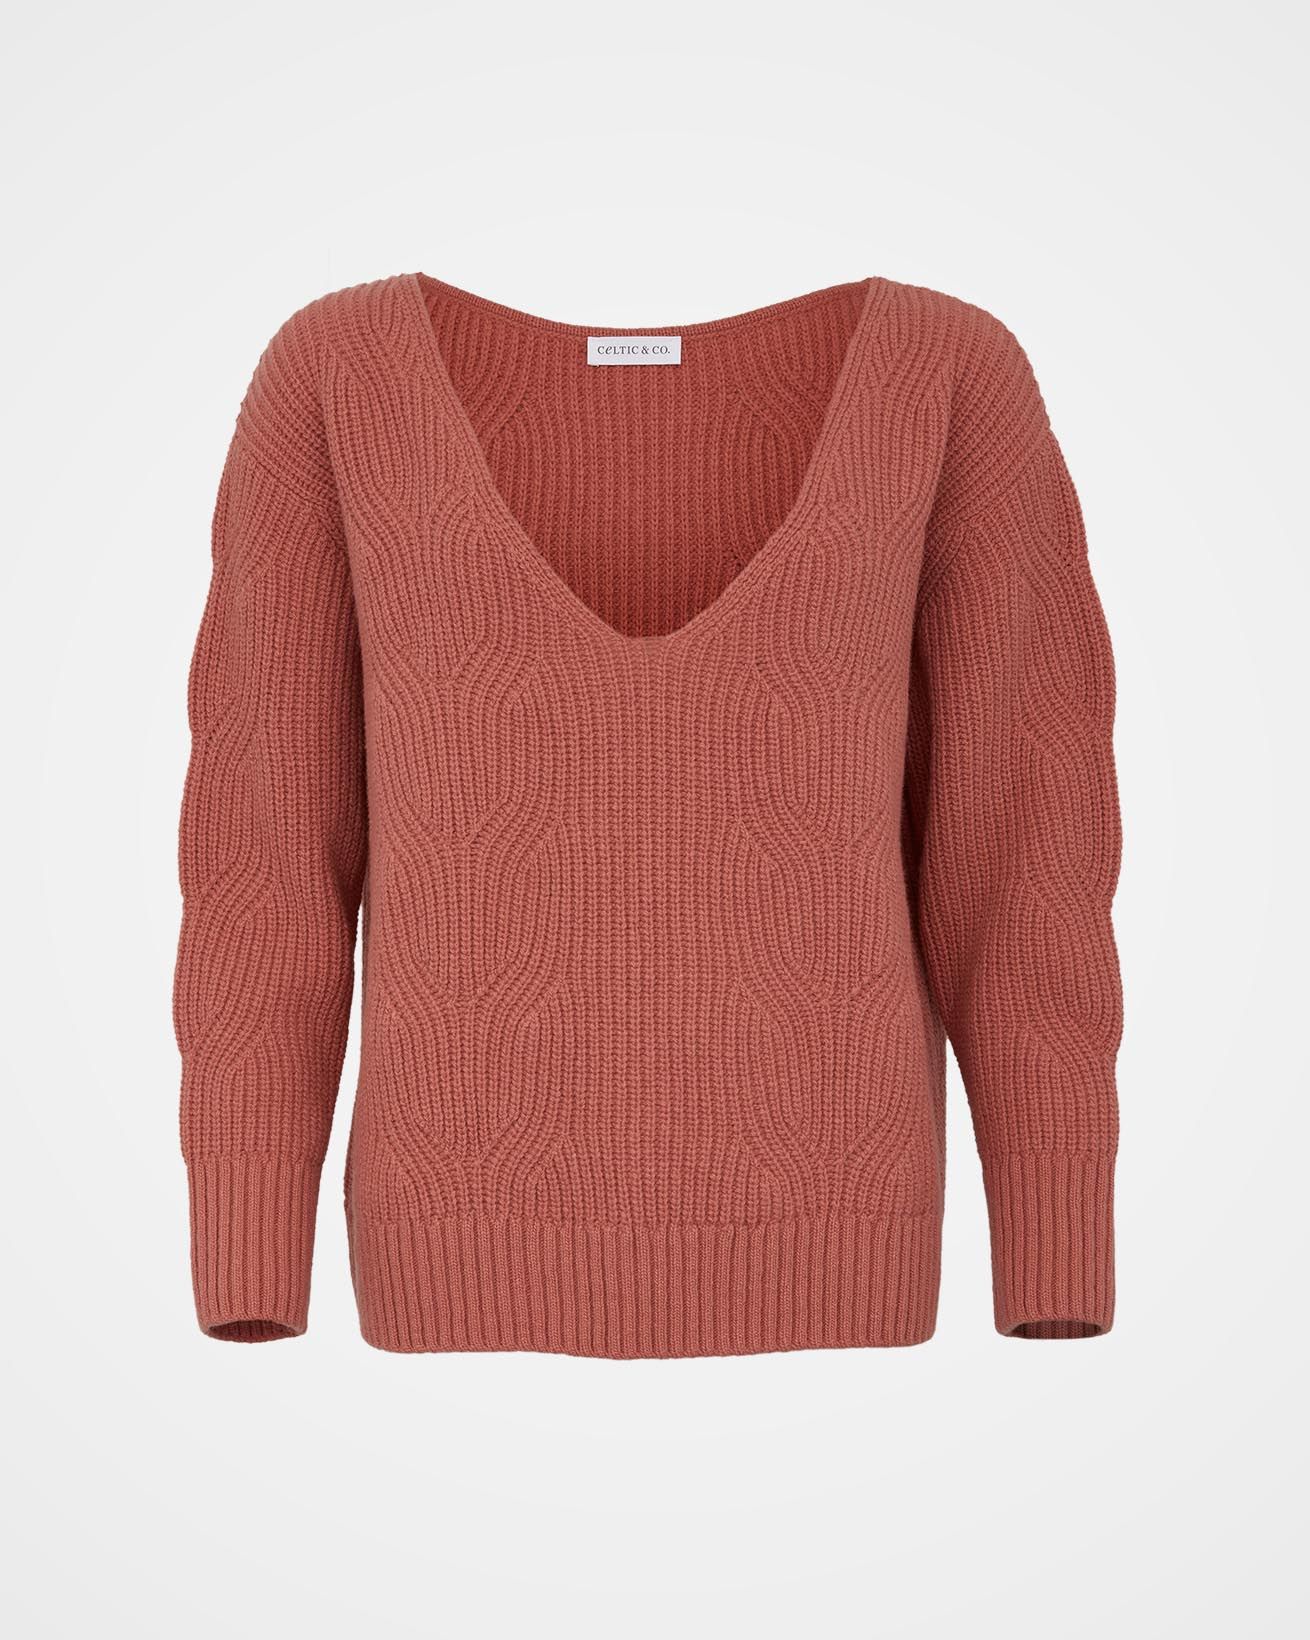 Ribbed Cable V Neck Sweater / Antique Rose / M